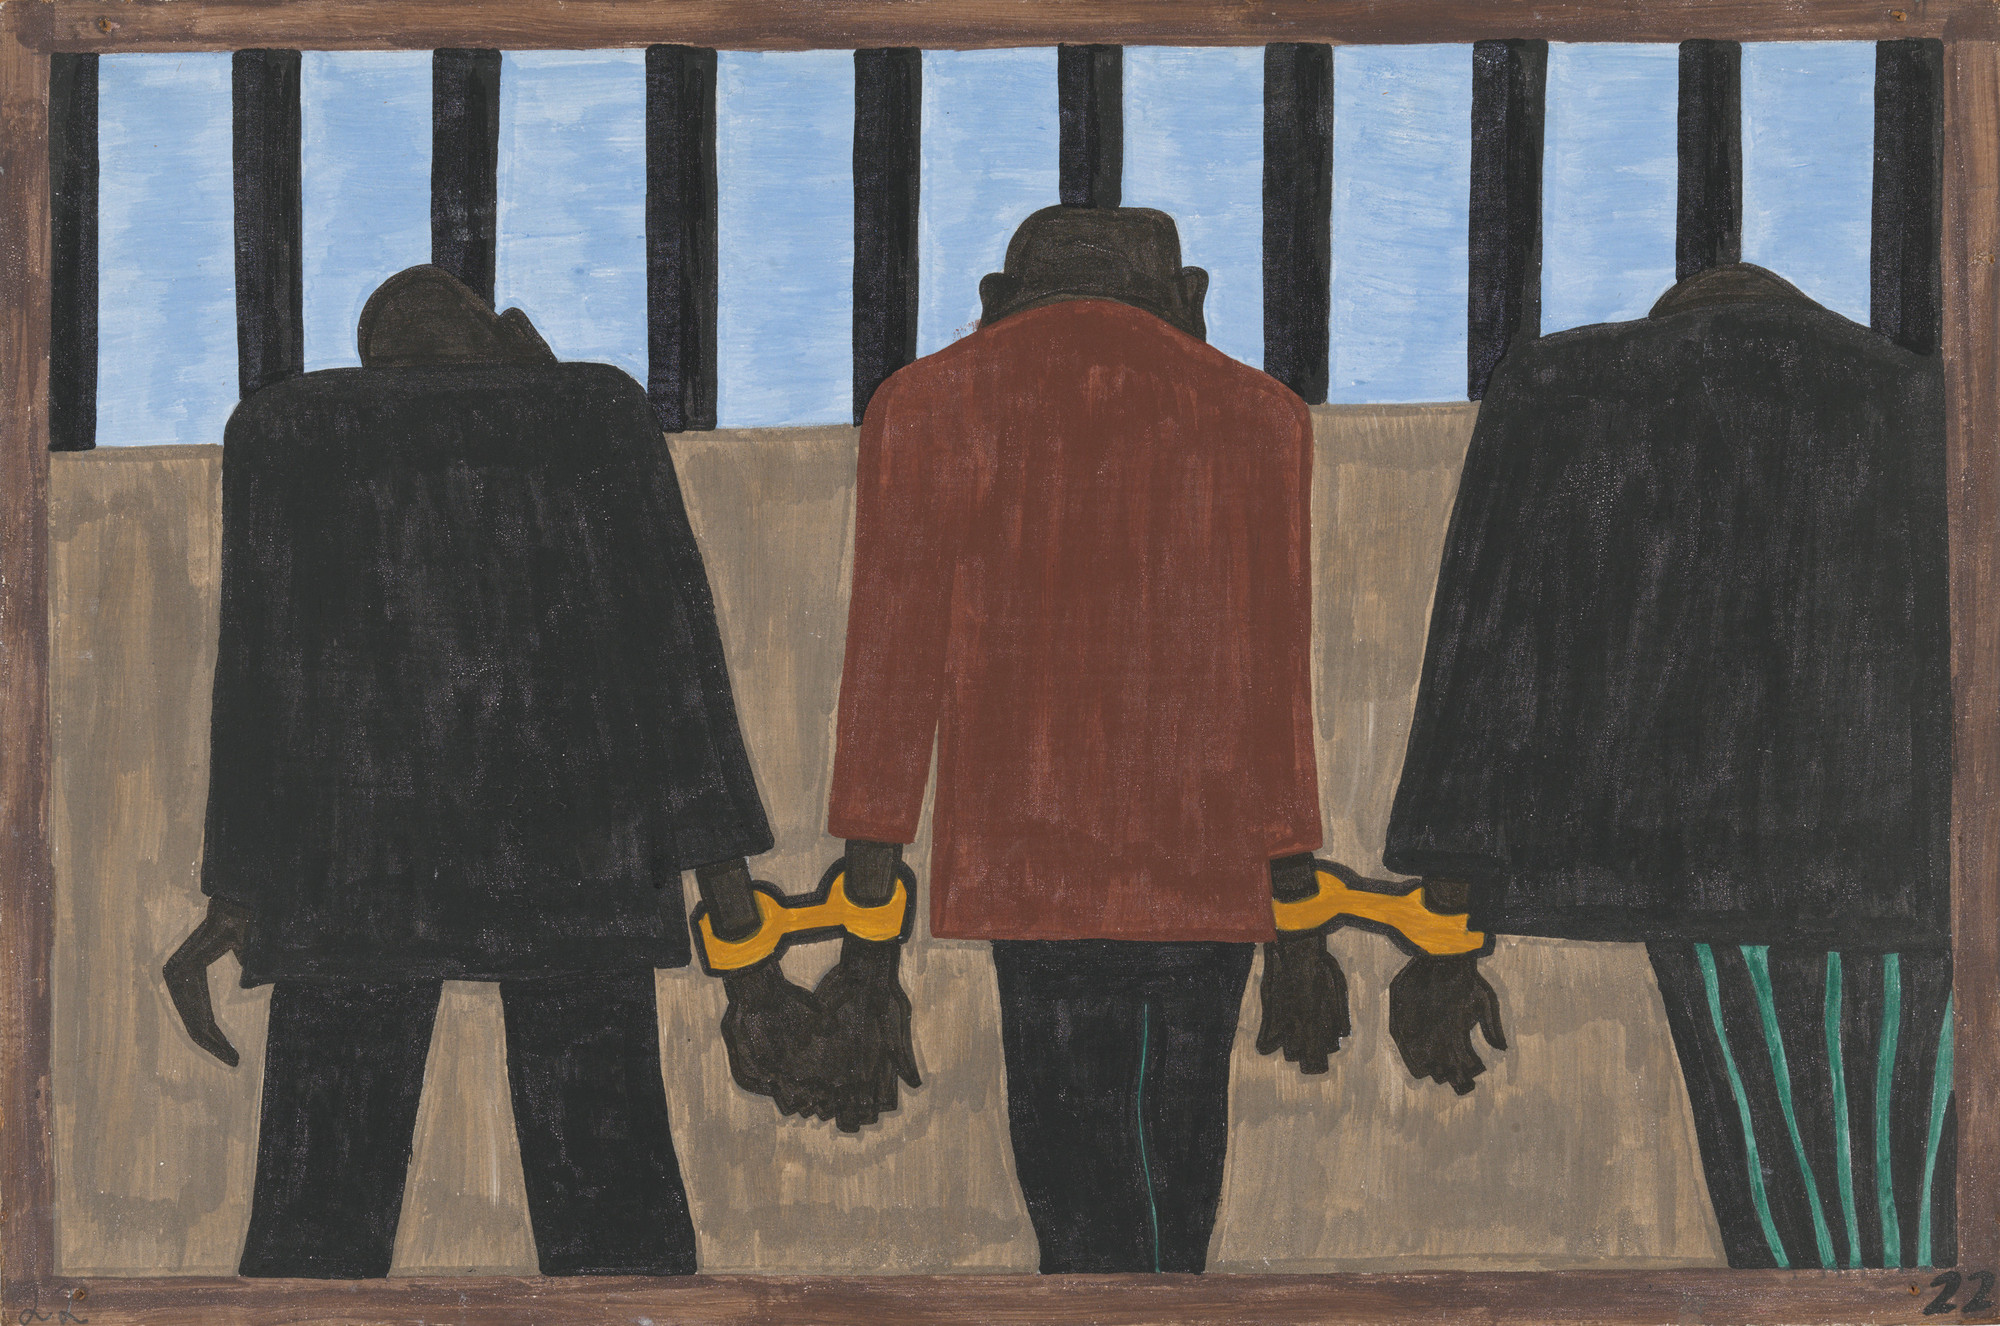 Jacob Lawrence. The Migration Series. 1940-41